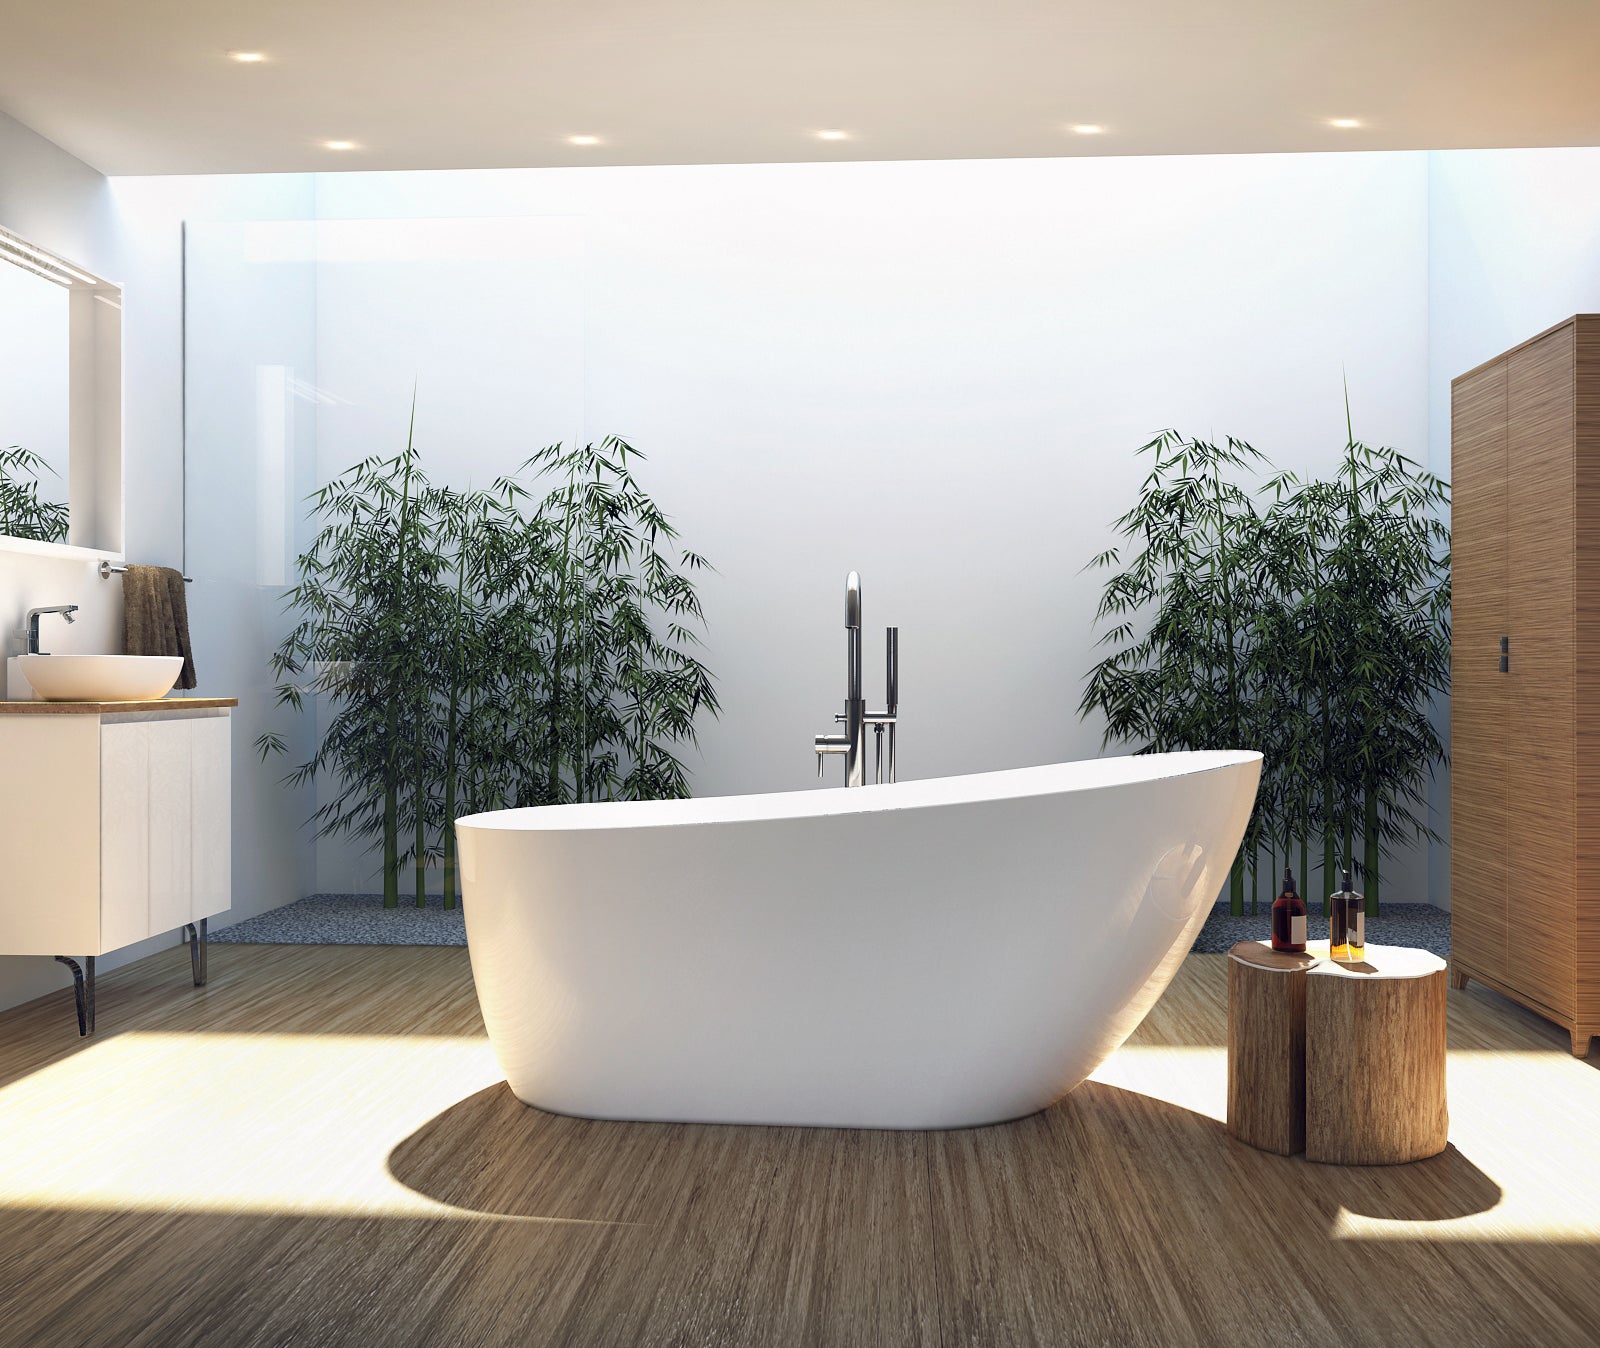 choosing the right tub for your bathroom - everything you need to know